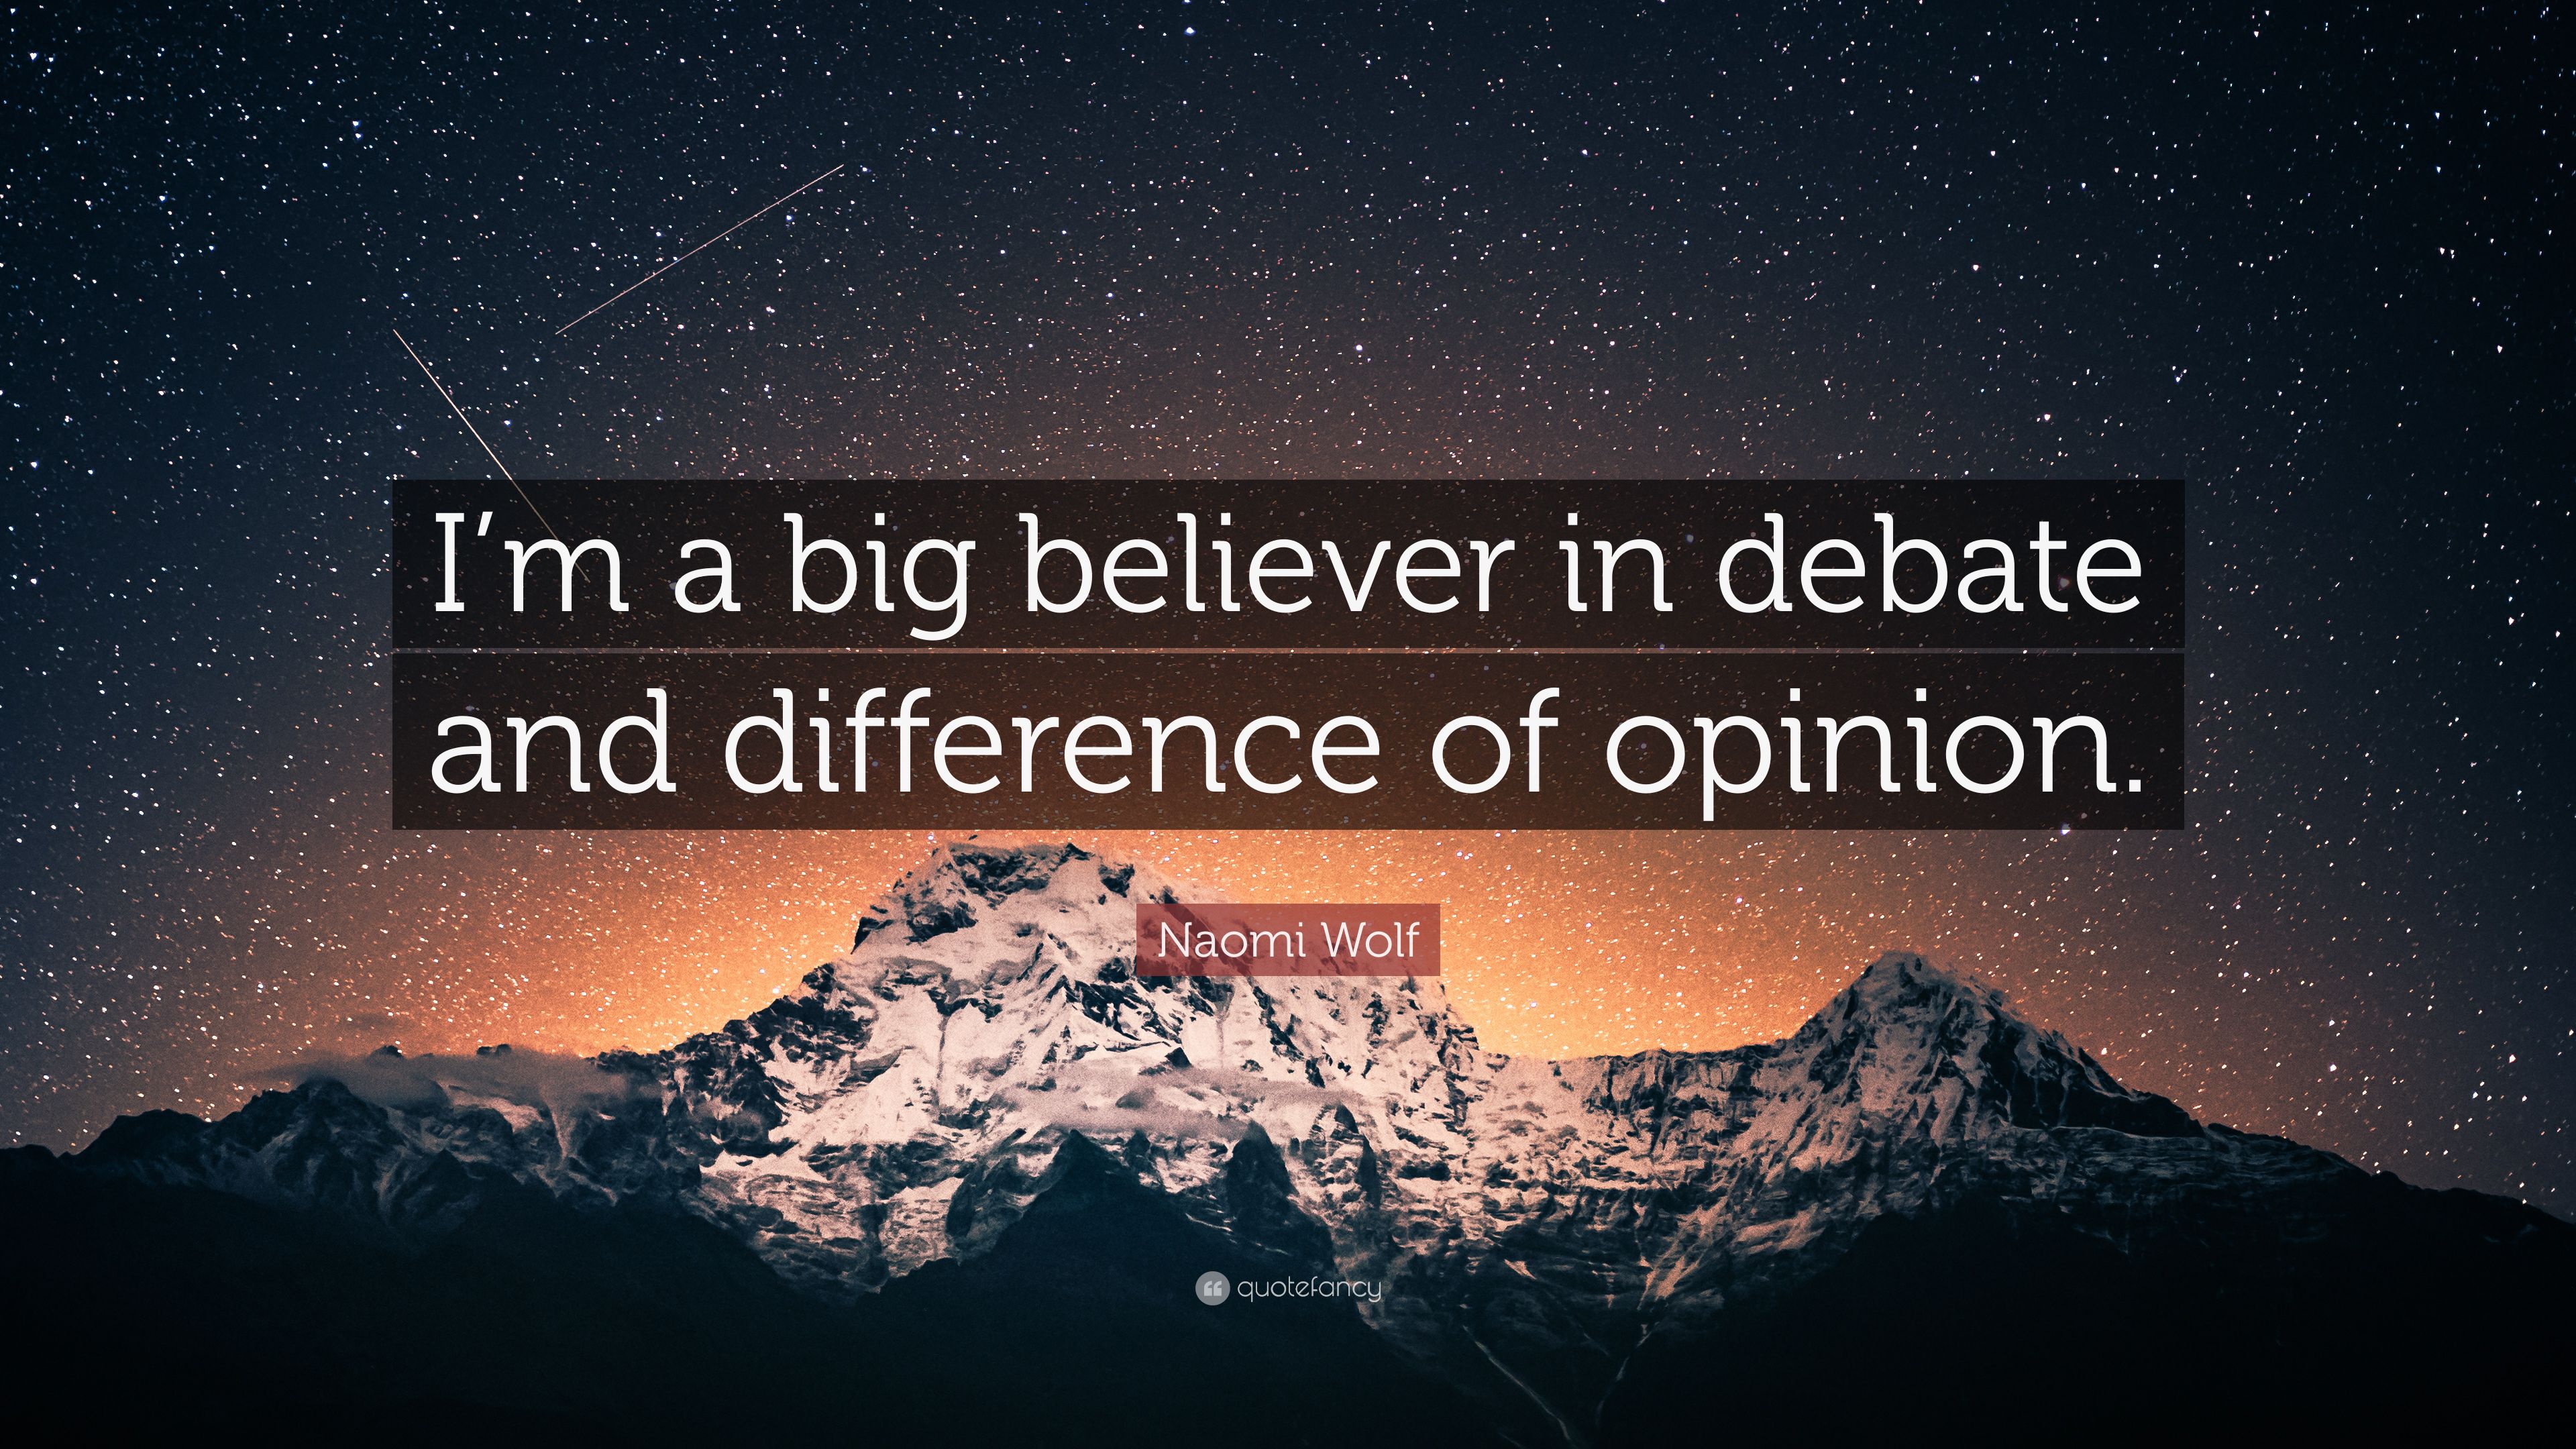 Naomi Wolf Quote: “I'm a big believer in debate and difference